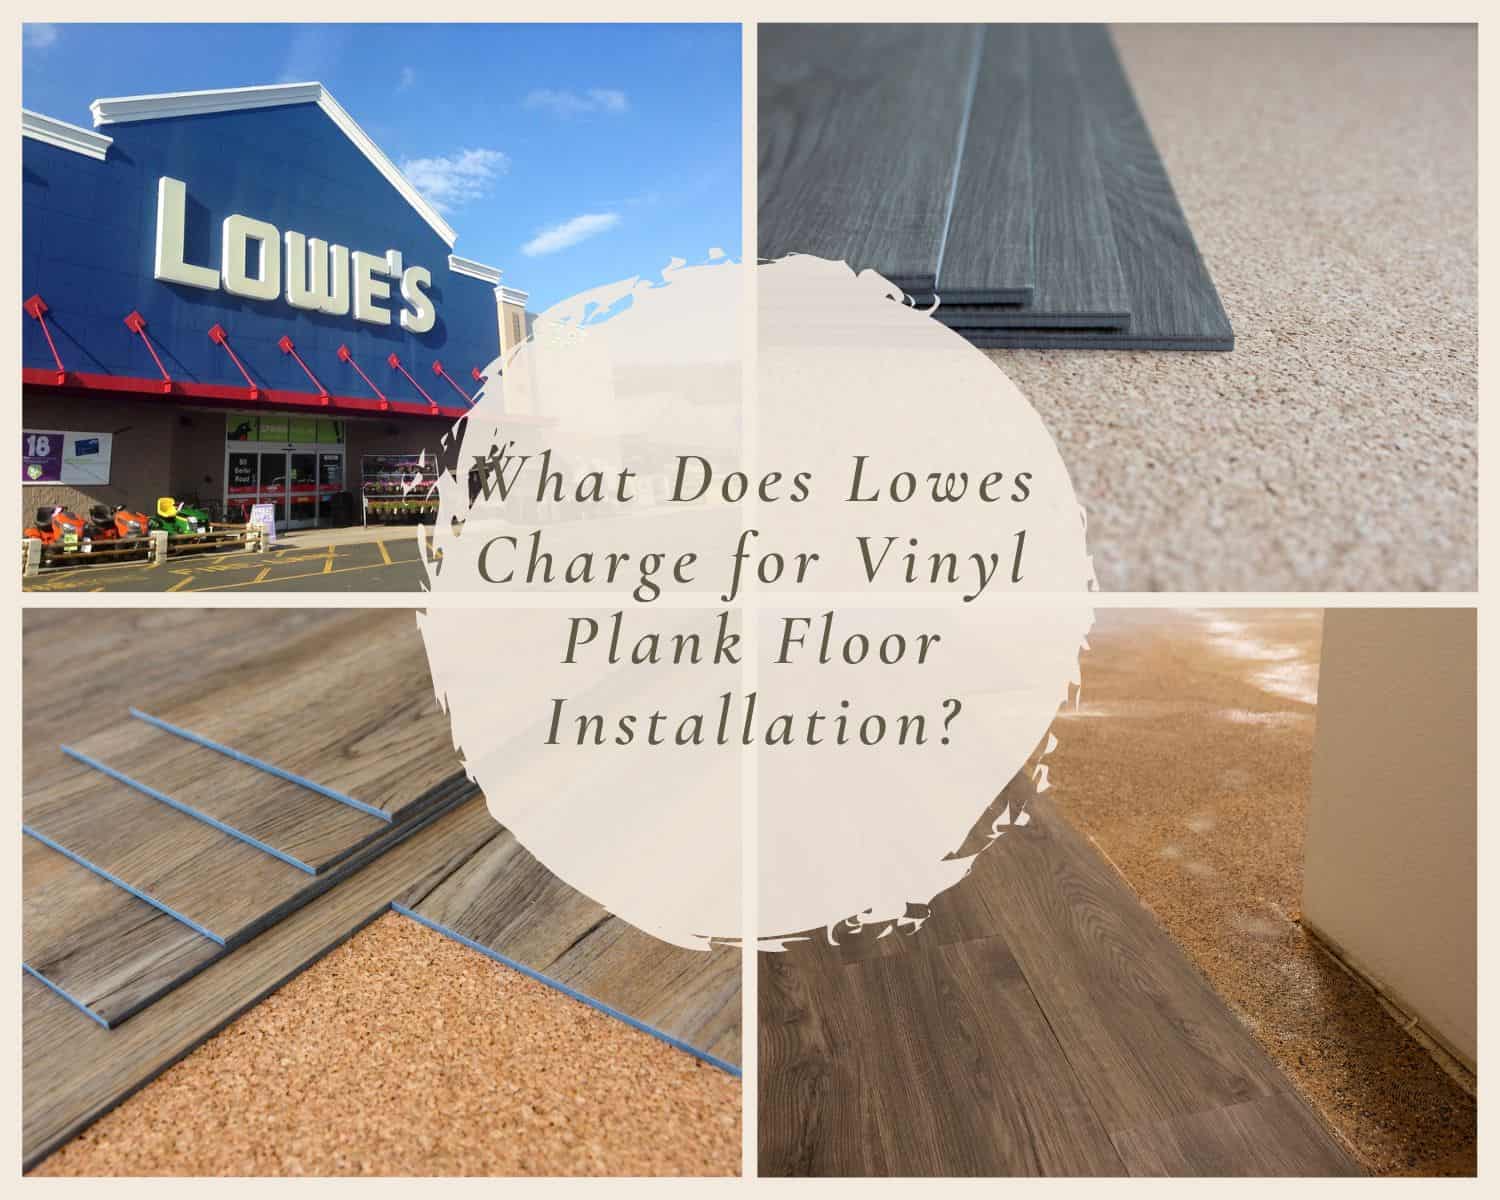 What Does Lowes Charge for Vinyl Plank Floor Installation